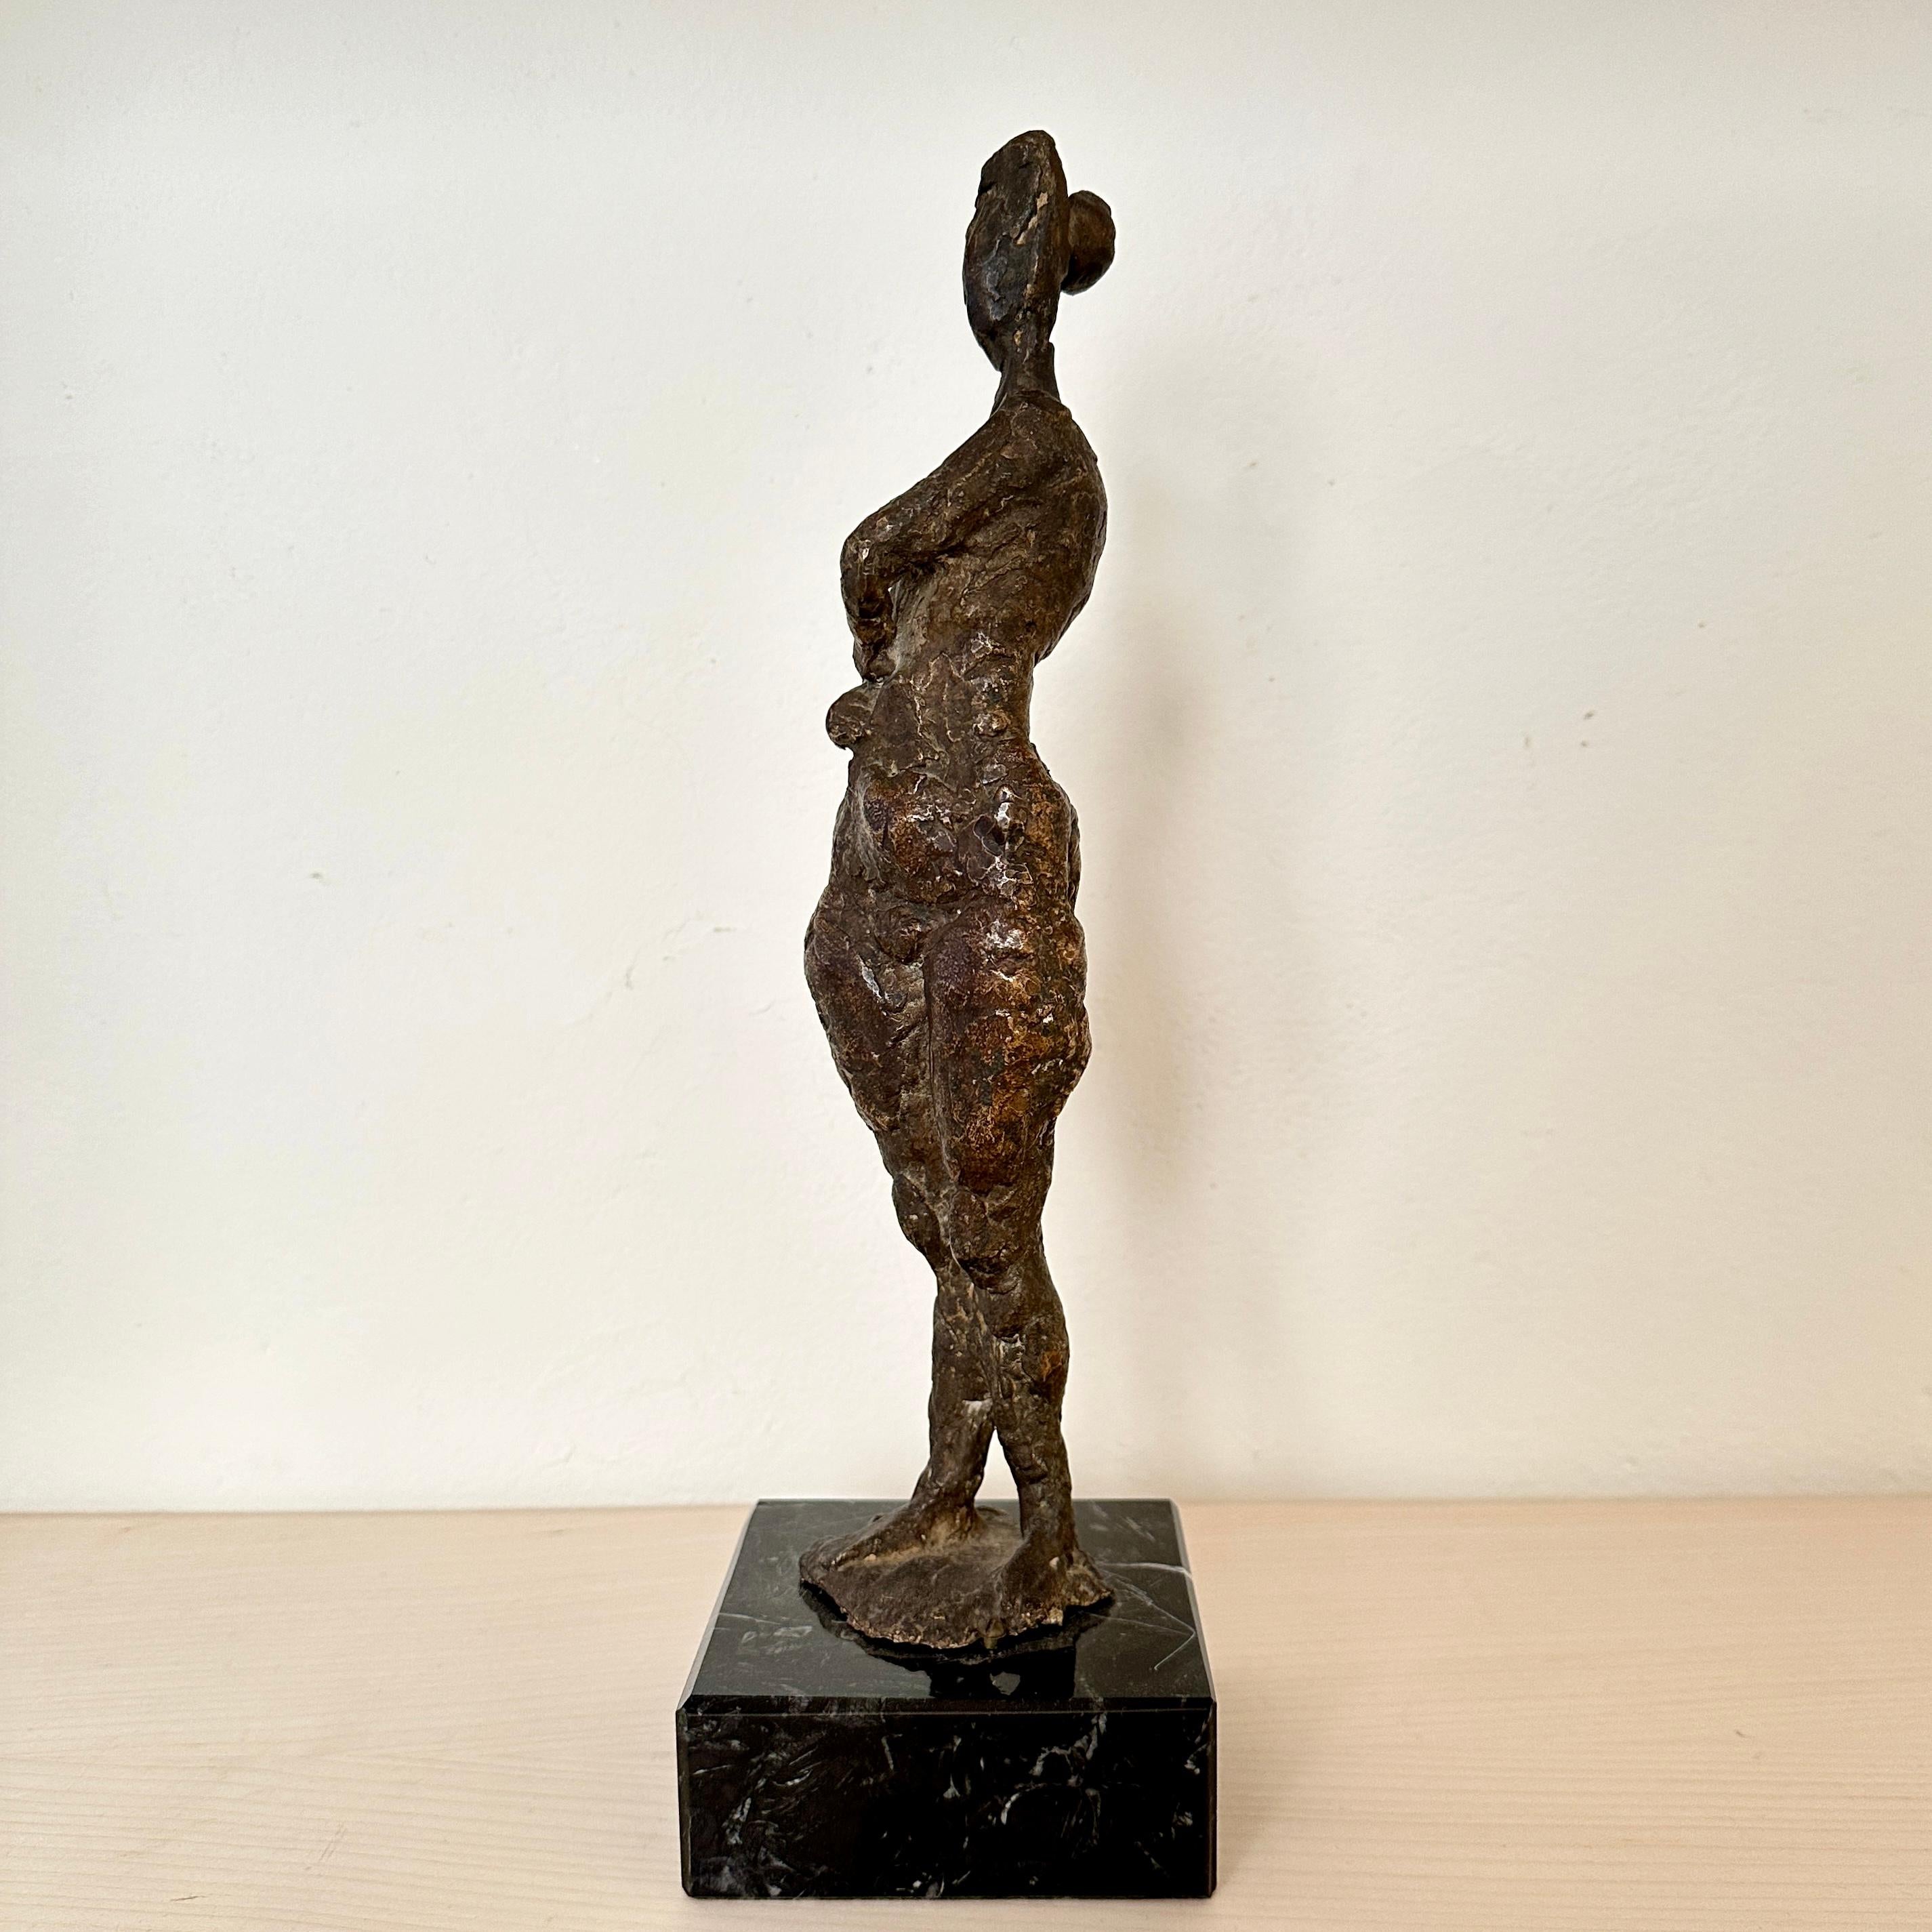 Mid-20th Century Small Cast Bronze Woman Sculpture by Oskar Bottoli on a Black Marble Stand, 1969 For Sale